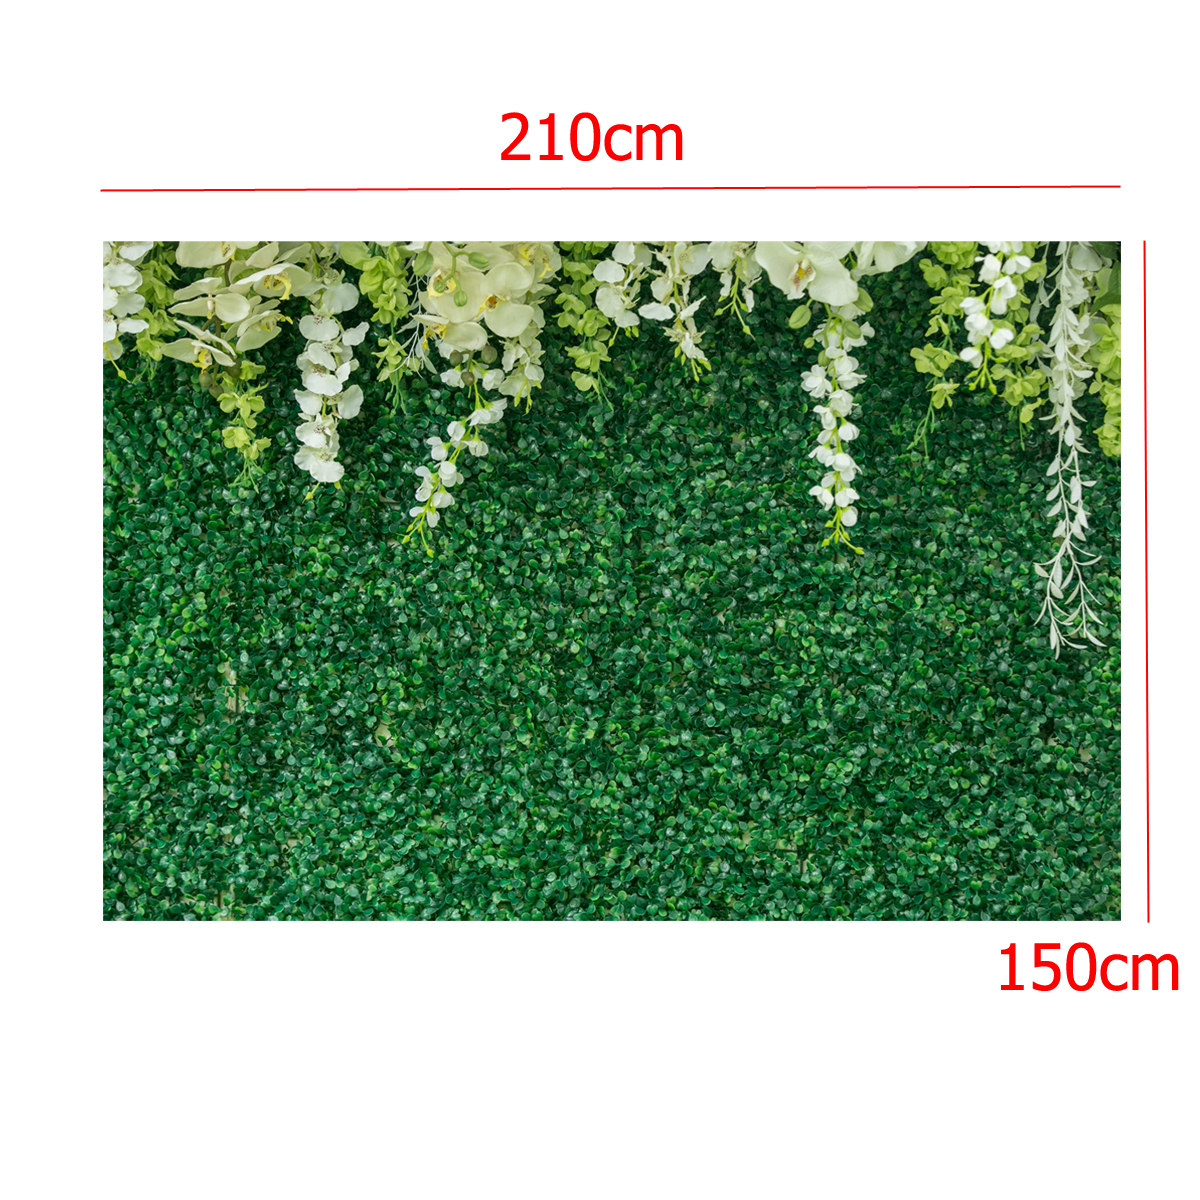 7ftx5ft-White-Flower-Green-Leaves-Photography-Background-Cloth-Backdrops-21x15m-1747745-3